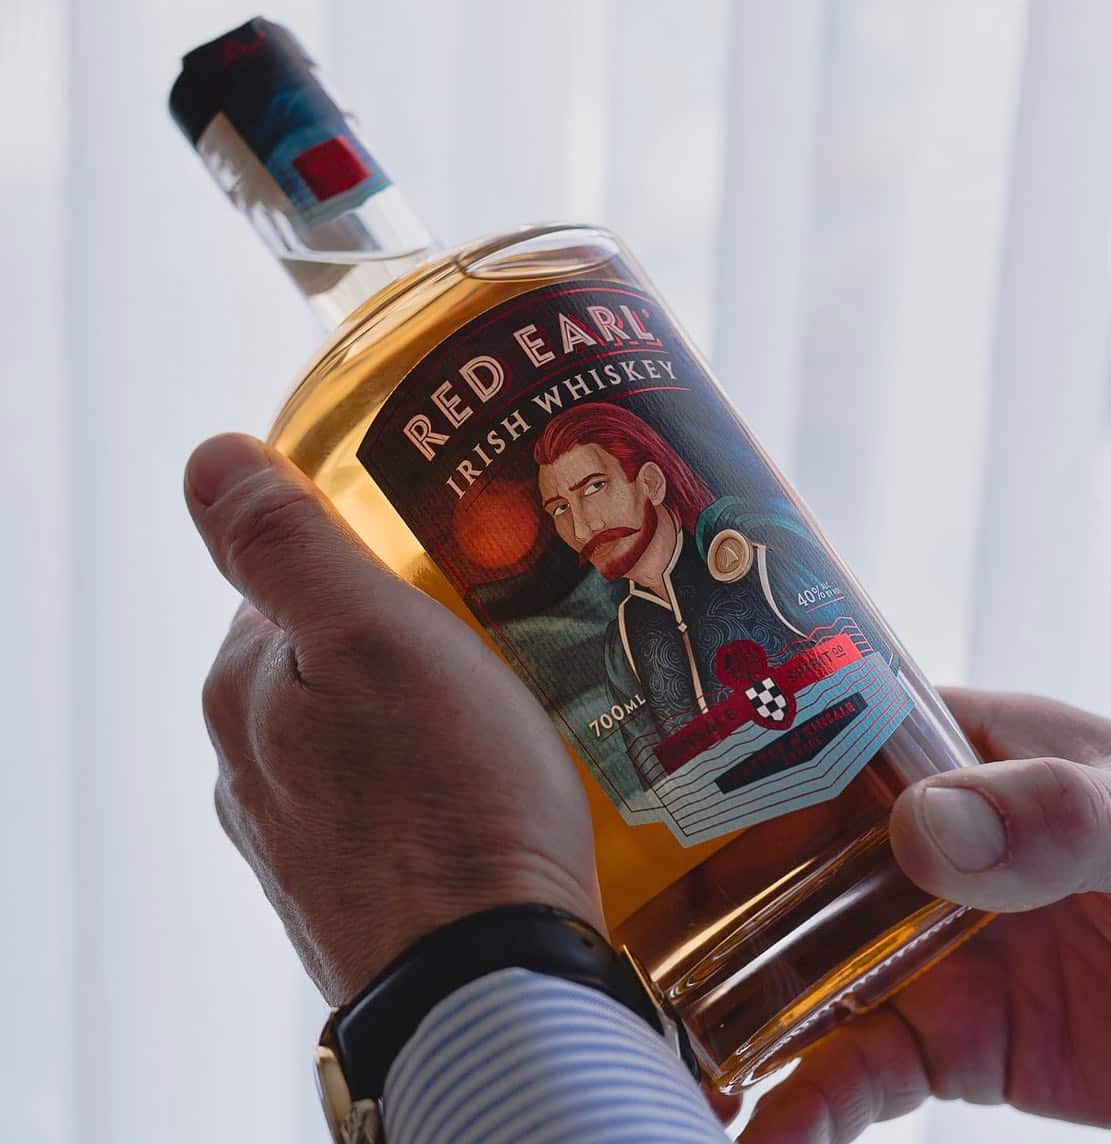 🥃 Our Red Earl Irish Whiskey has a medium bodied mouthfeel that ends in a long, warm and moreish finish. Triple-casking delivers roundness of flavour, lengthy finish & an exceptional aroma.

Aged in Bourbon Casks ✔️ 
Aged in Sherry Casks ✔️
Matured in Rioja Casks ✔️

🍀 Available to purchase in selected @supervalu_irl , @centra_irl and independent off licences nationwide. 

Learn more: www.kinsalespirit.com

#drinkresponsibly #redearlwhiskey #irishwhiskey #whiskey #supervalu #centra #irish #ireland #kinsale #whisky